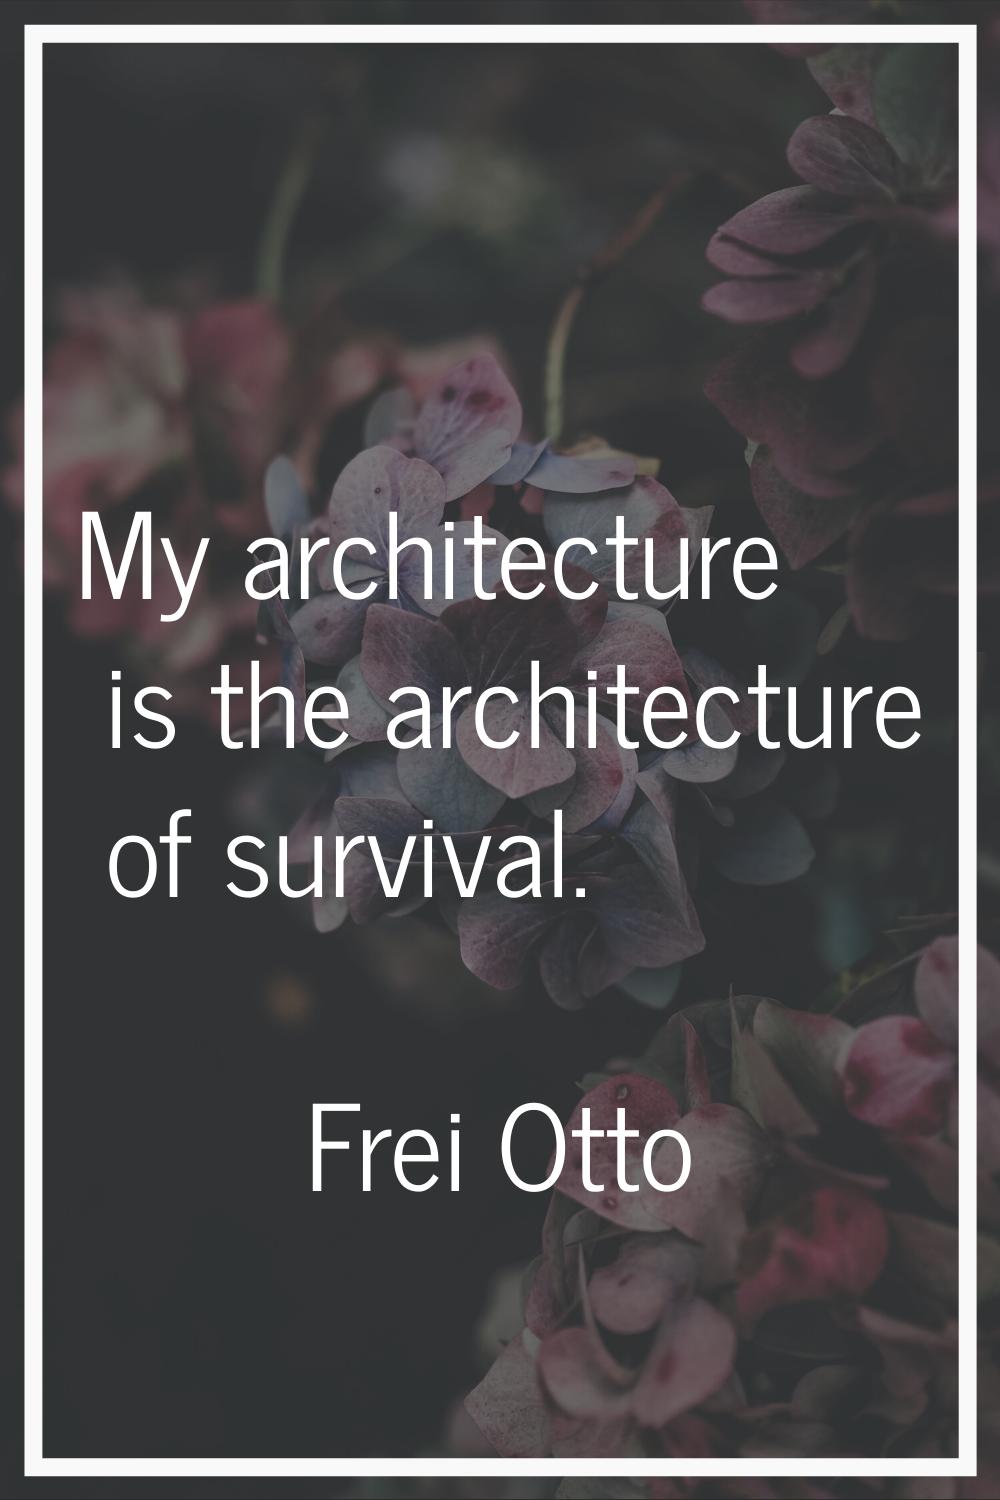 My architecture is the architecture of survival.